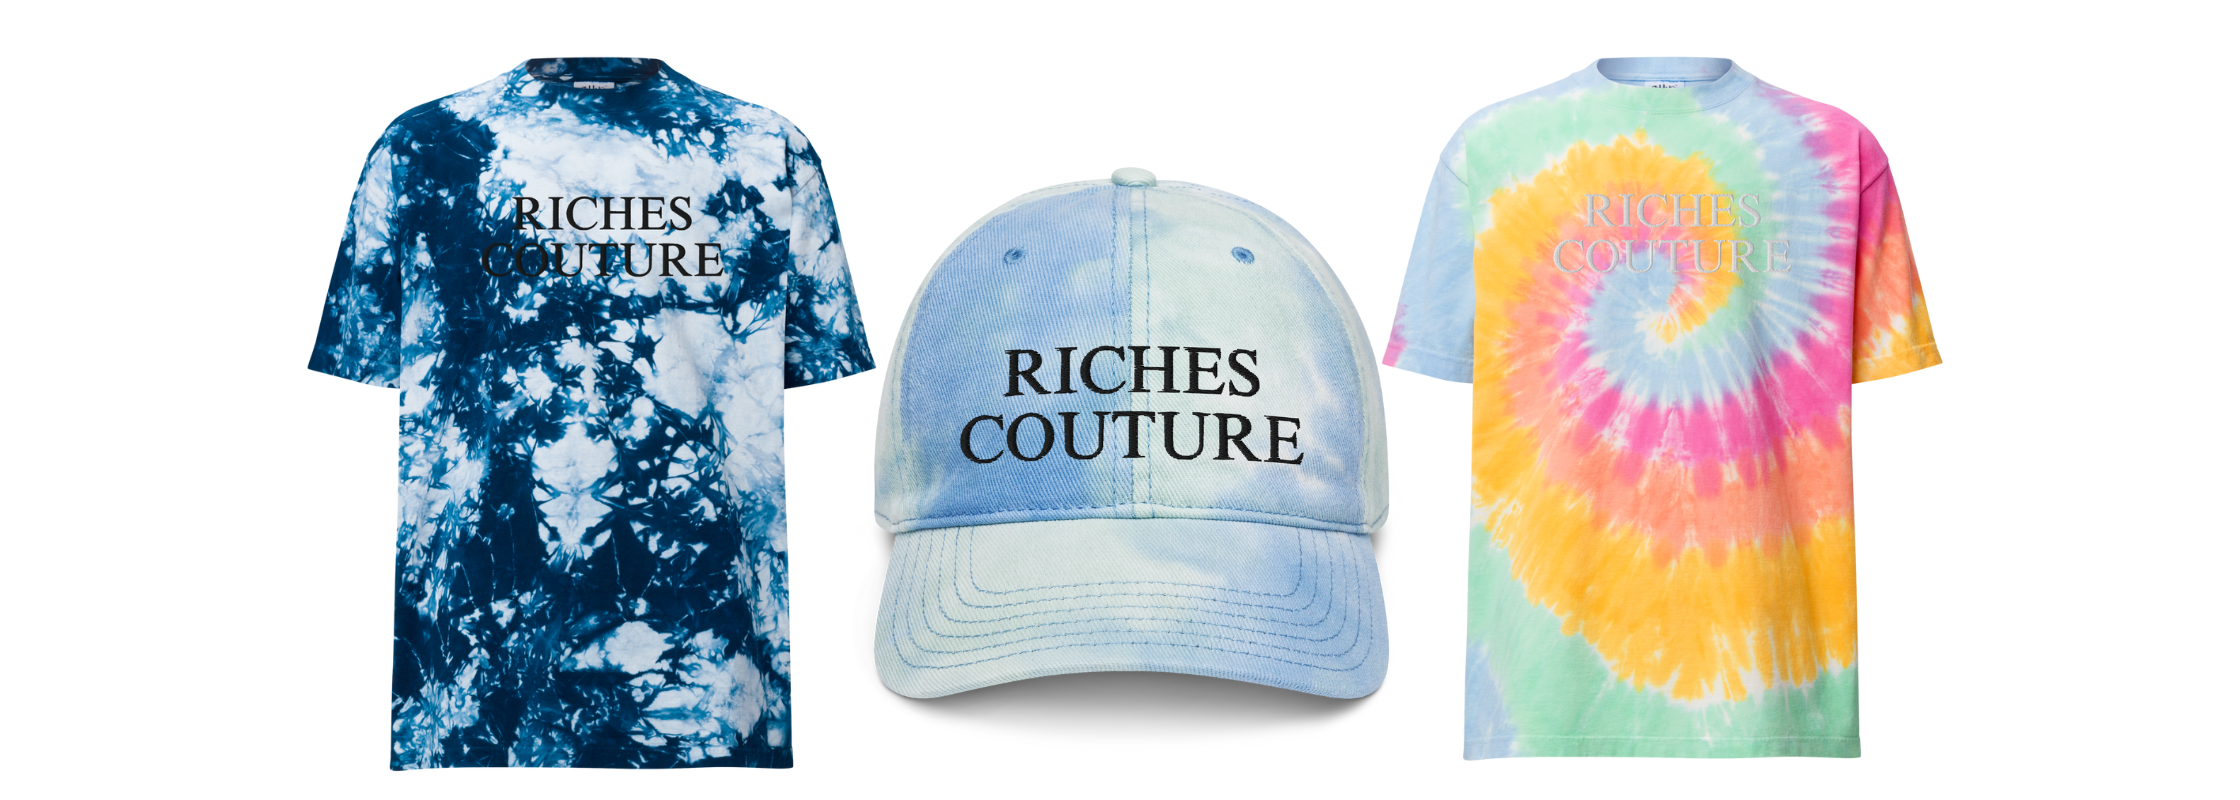 Riches Couture Tie Dye Collection